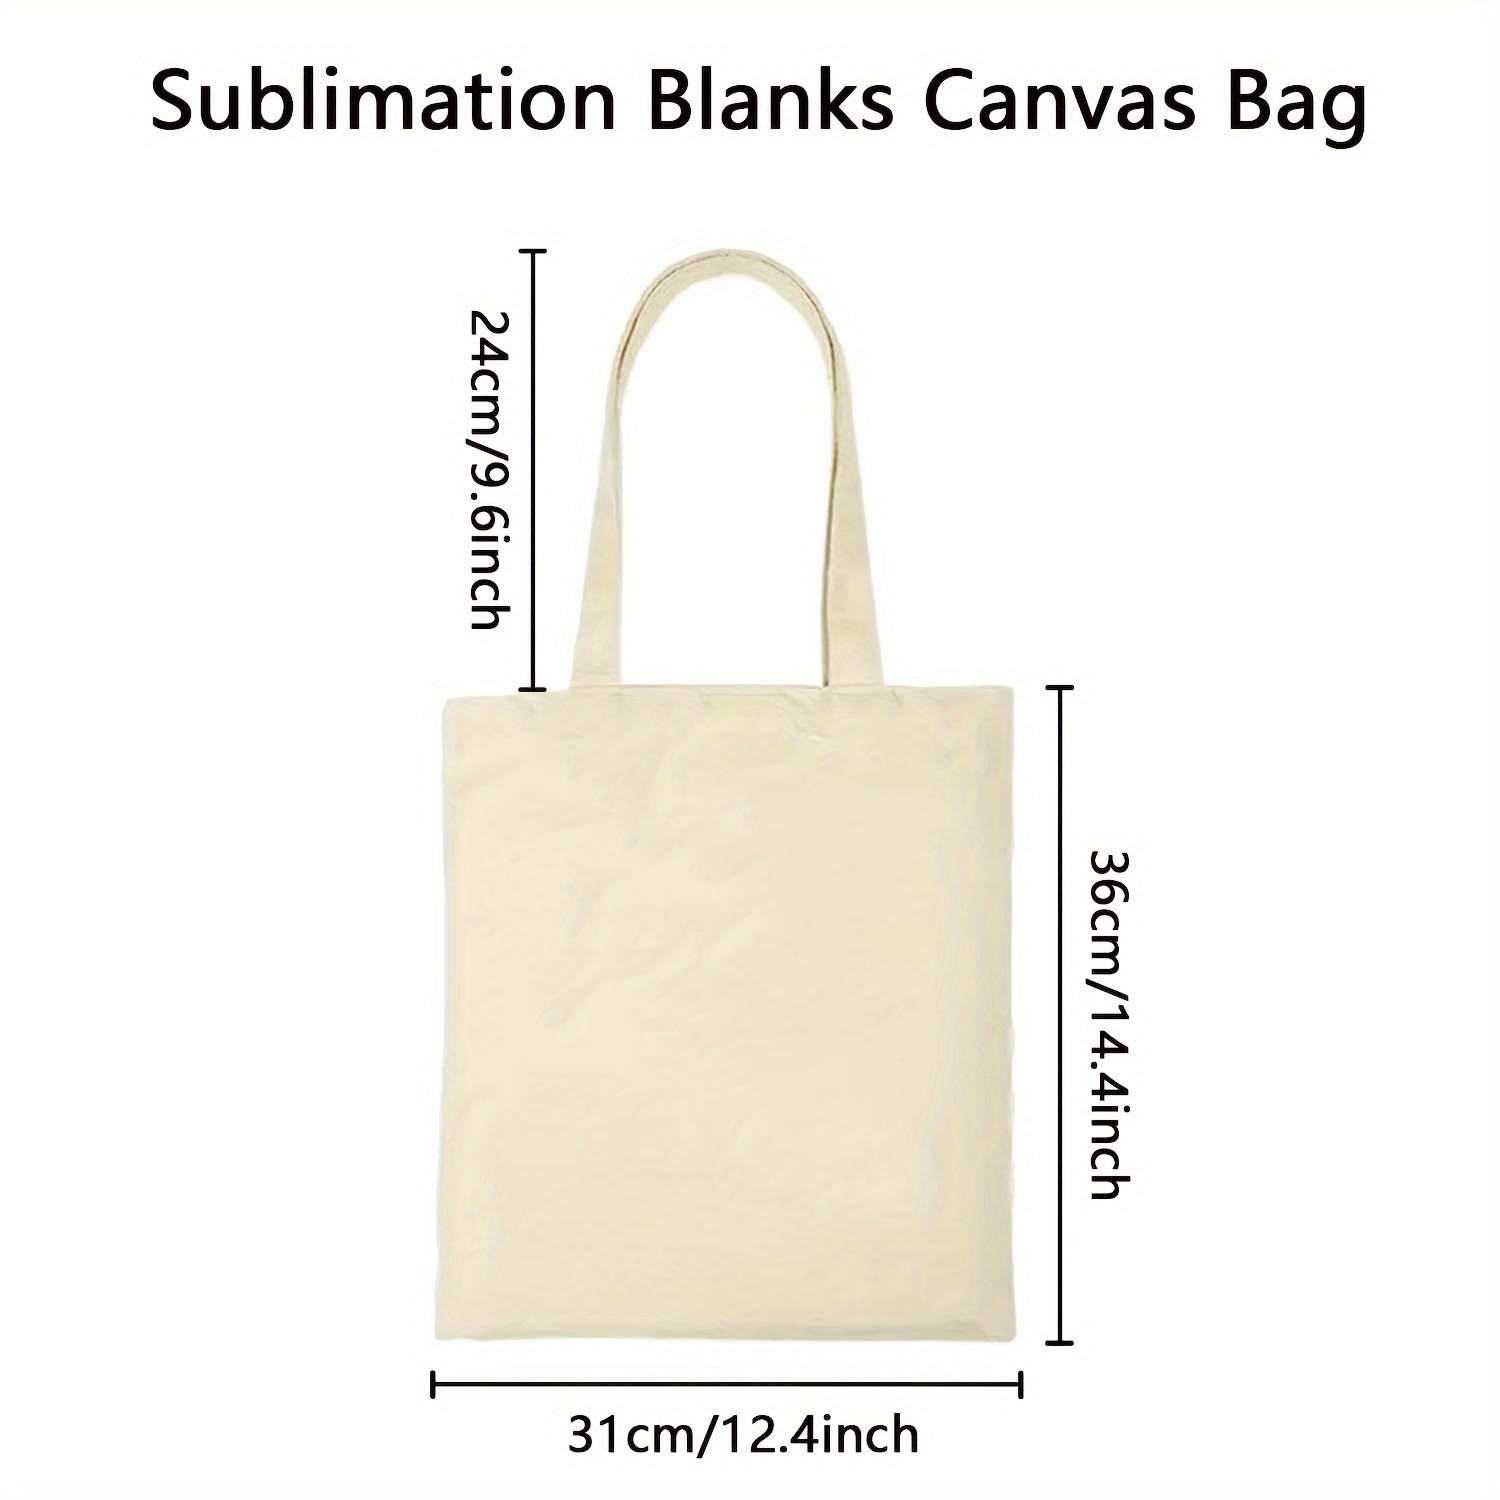 12pcs Sublimation Tote Bags Sublimation Blanks Canvas Bag Bulk Reusable  Heat Transfer Grocery Shopping Cloth Bags